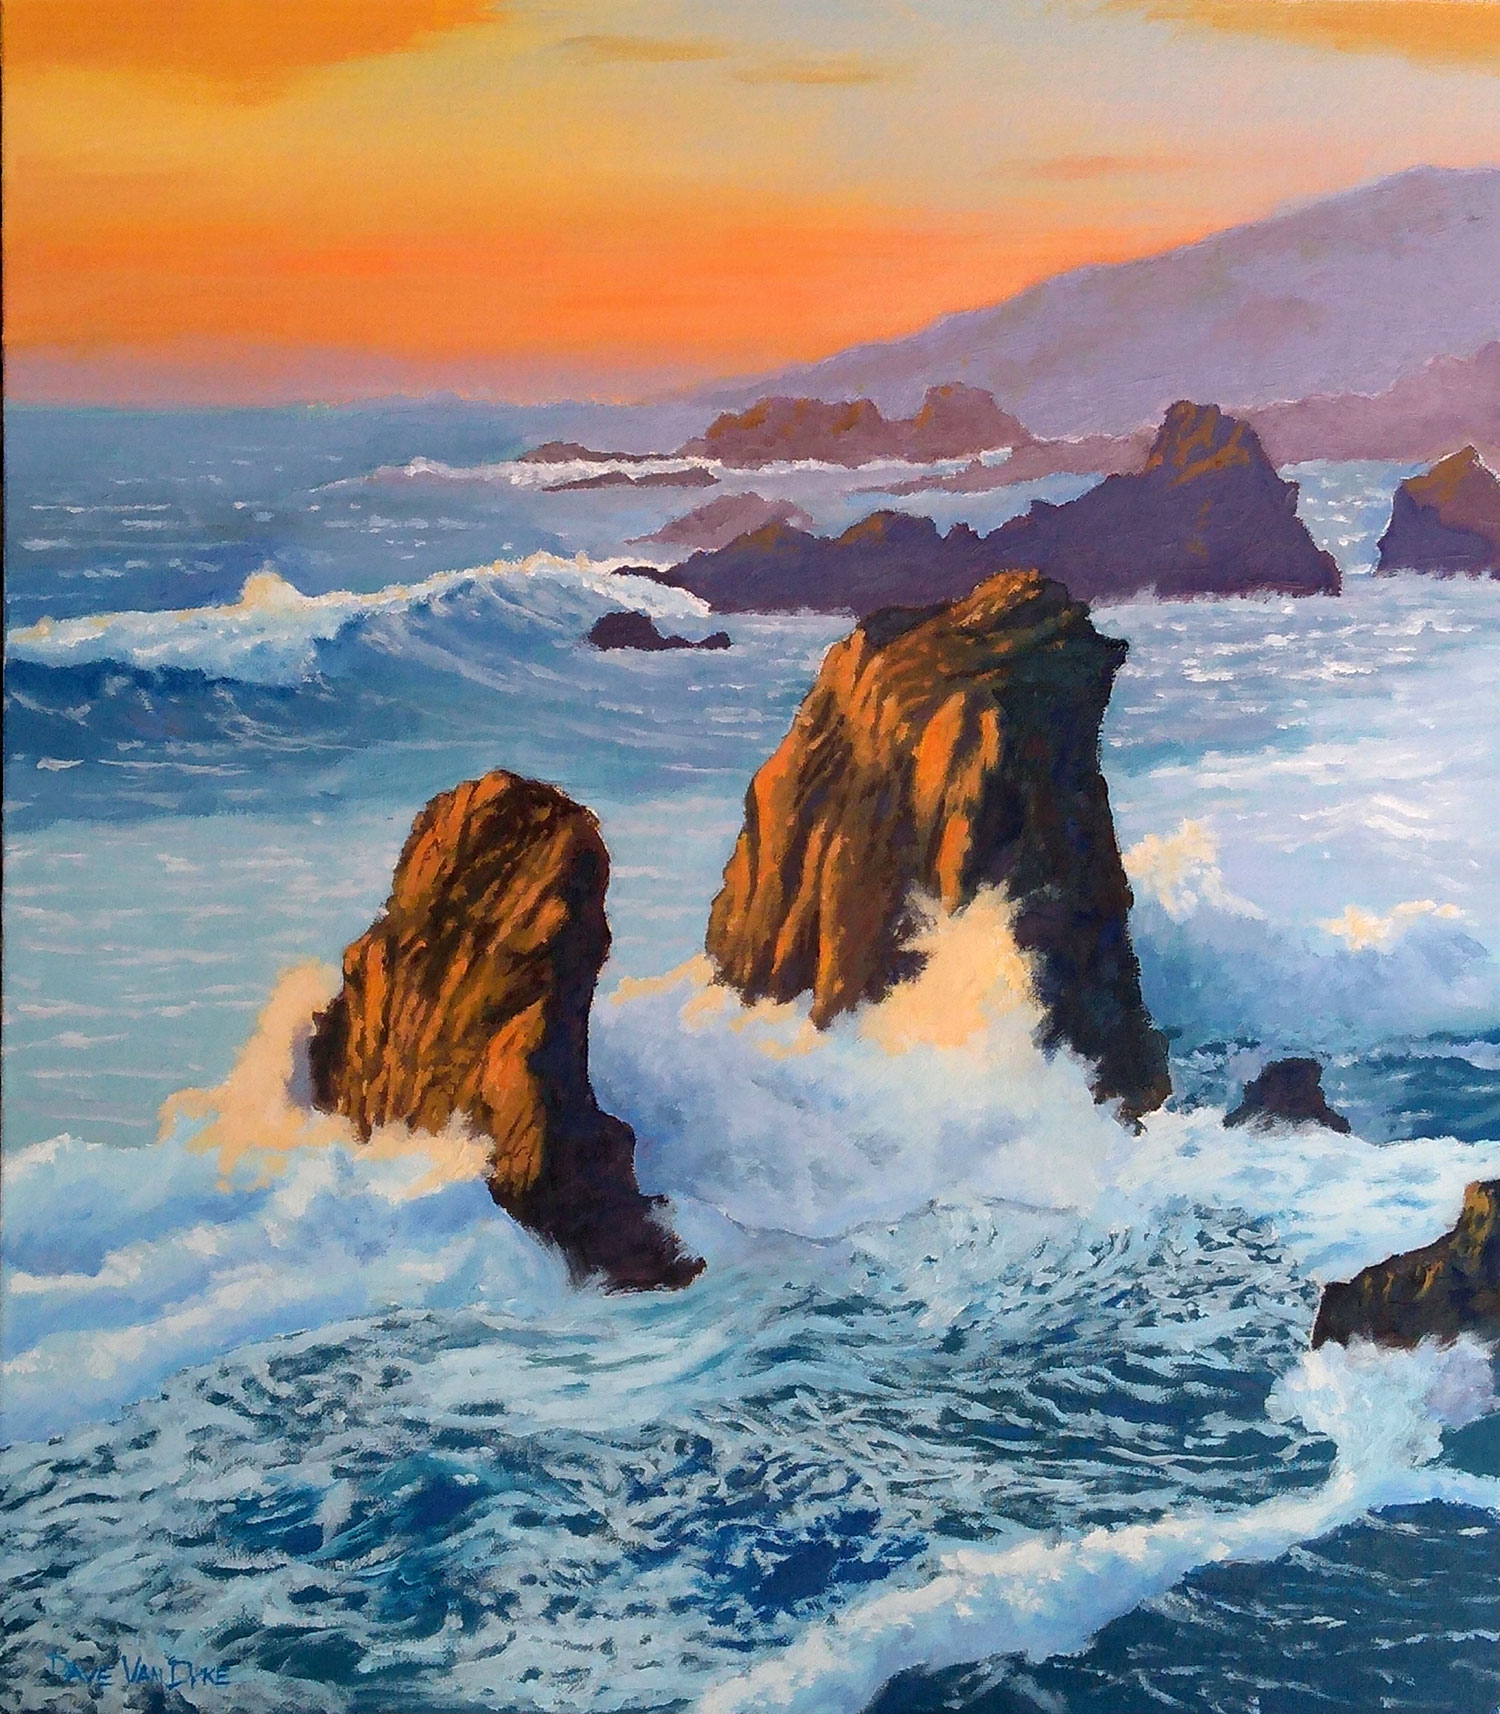 oil painting: Sea Stacks at Sunset by Dave Van Dyke